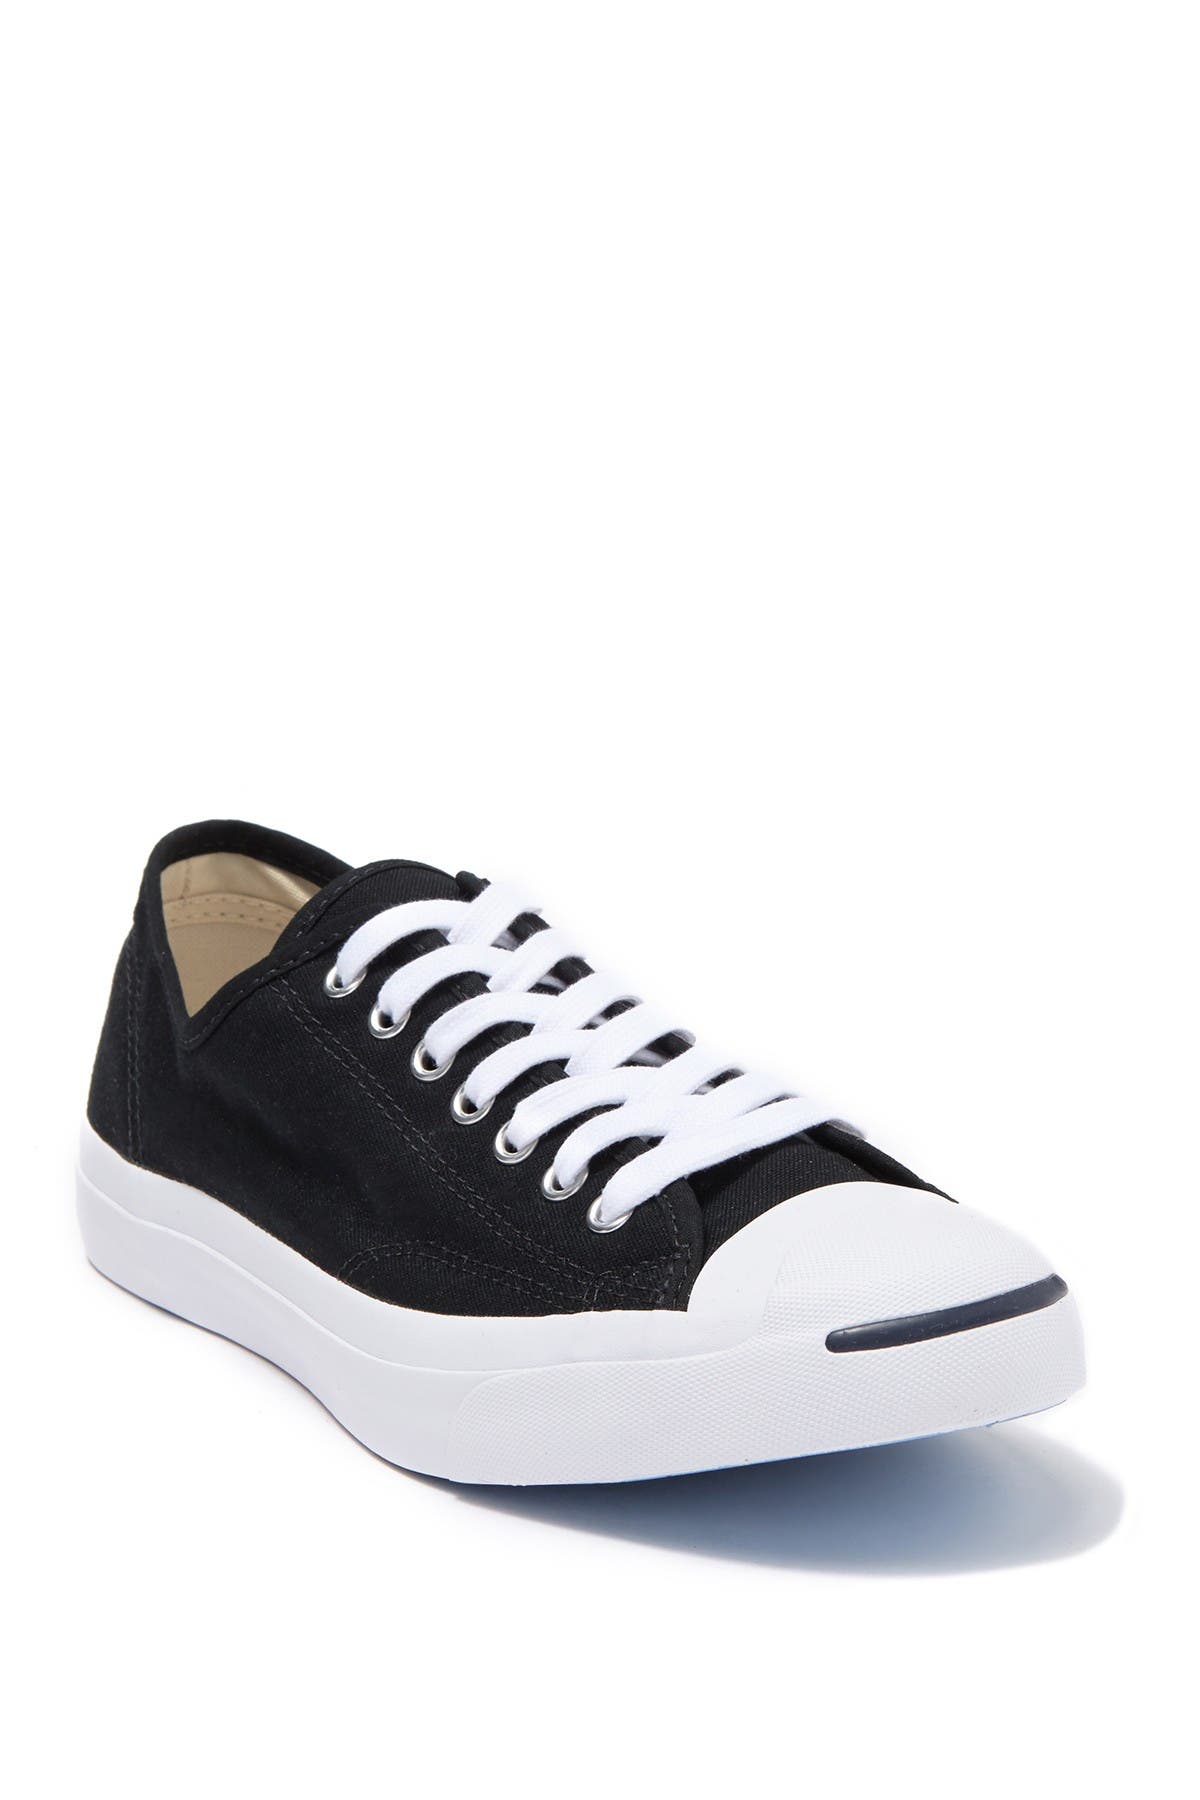 Converse | Jack Purcell Sneaker 